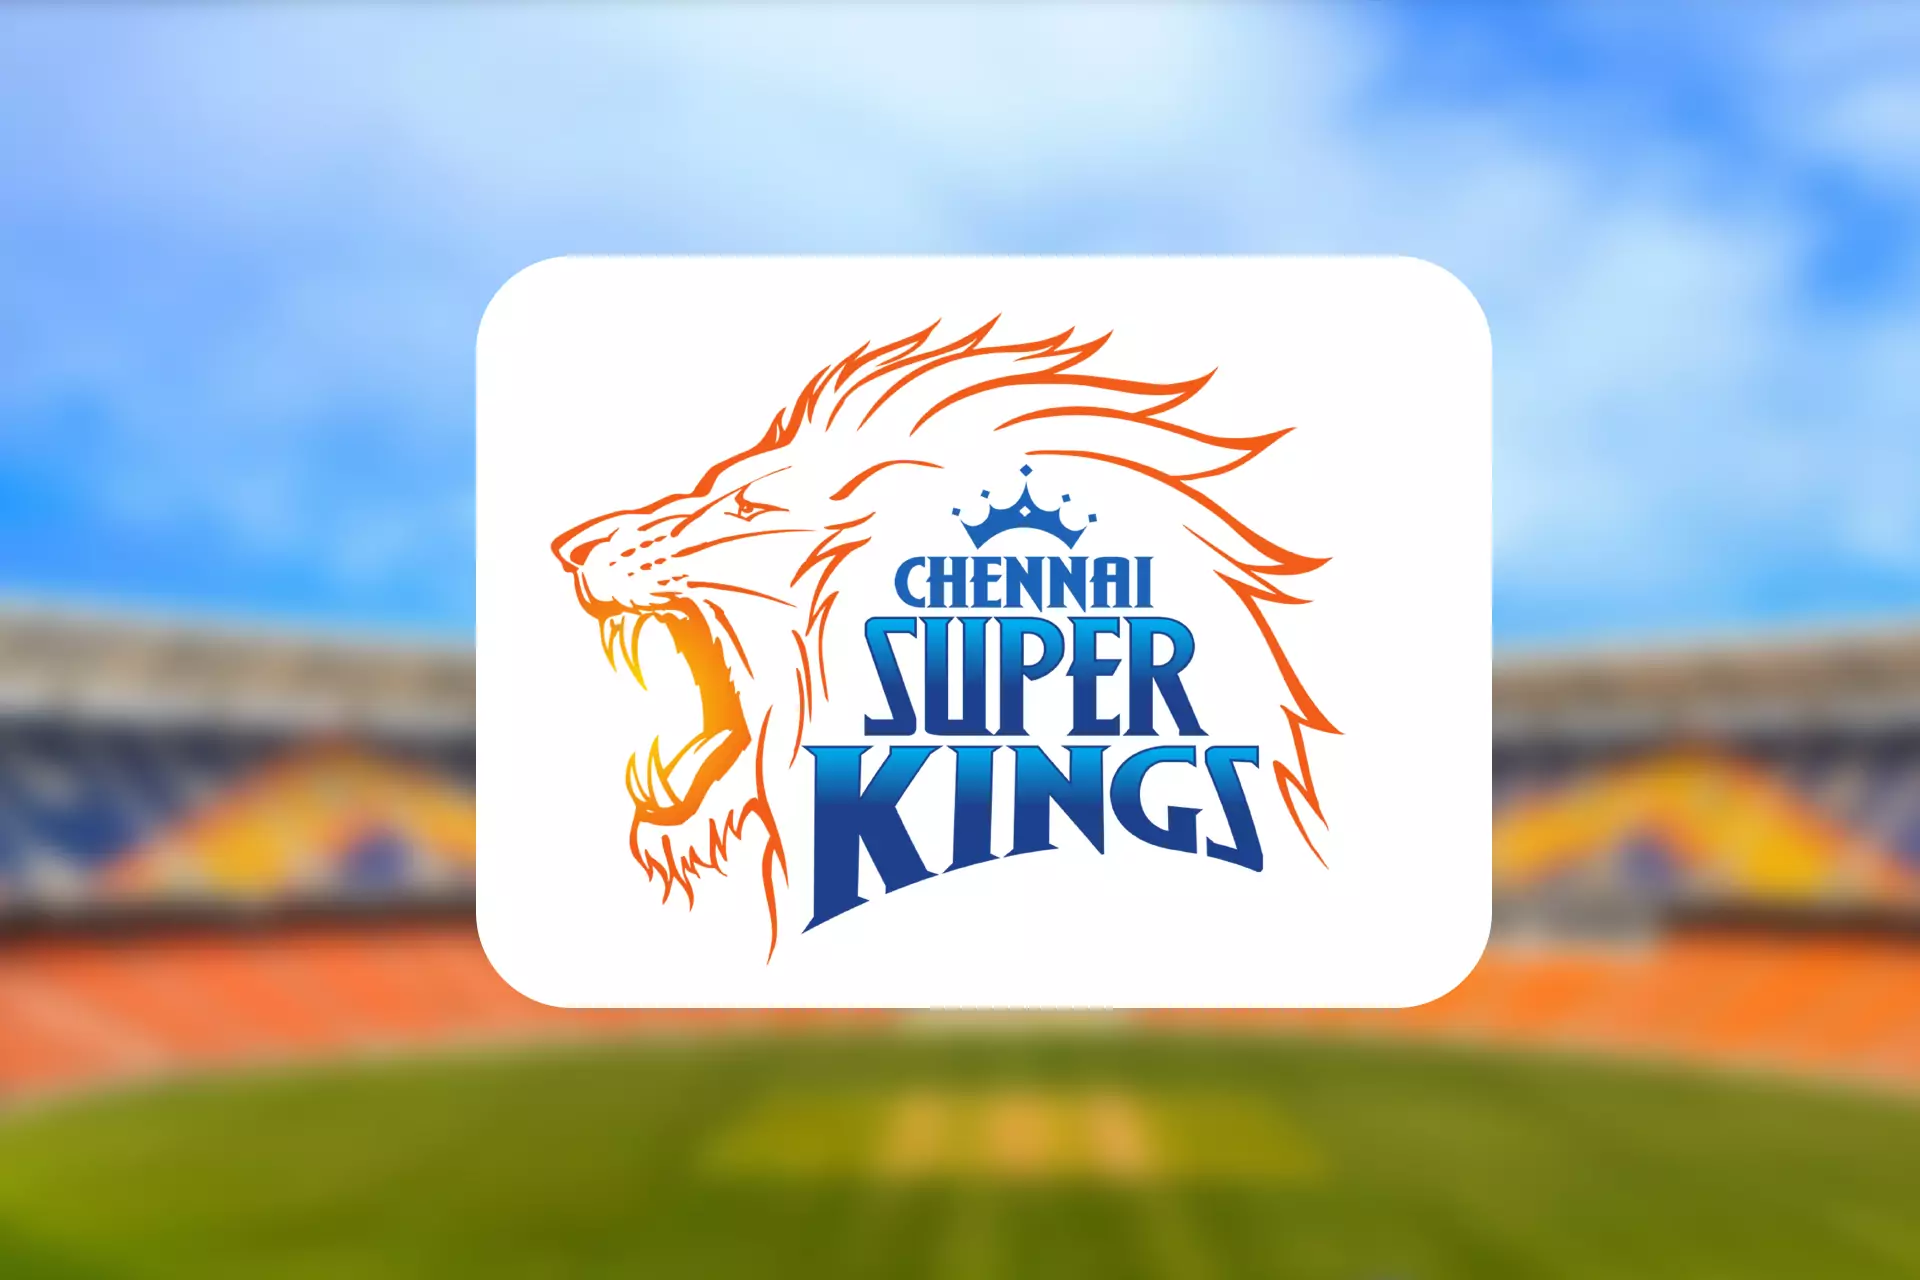 Chennai Super Kings was the winner of the IPL Cup three times.